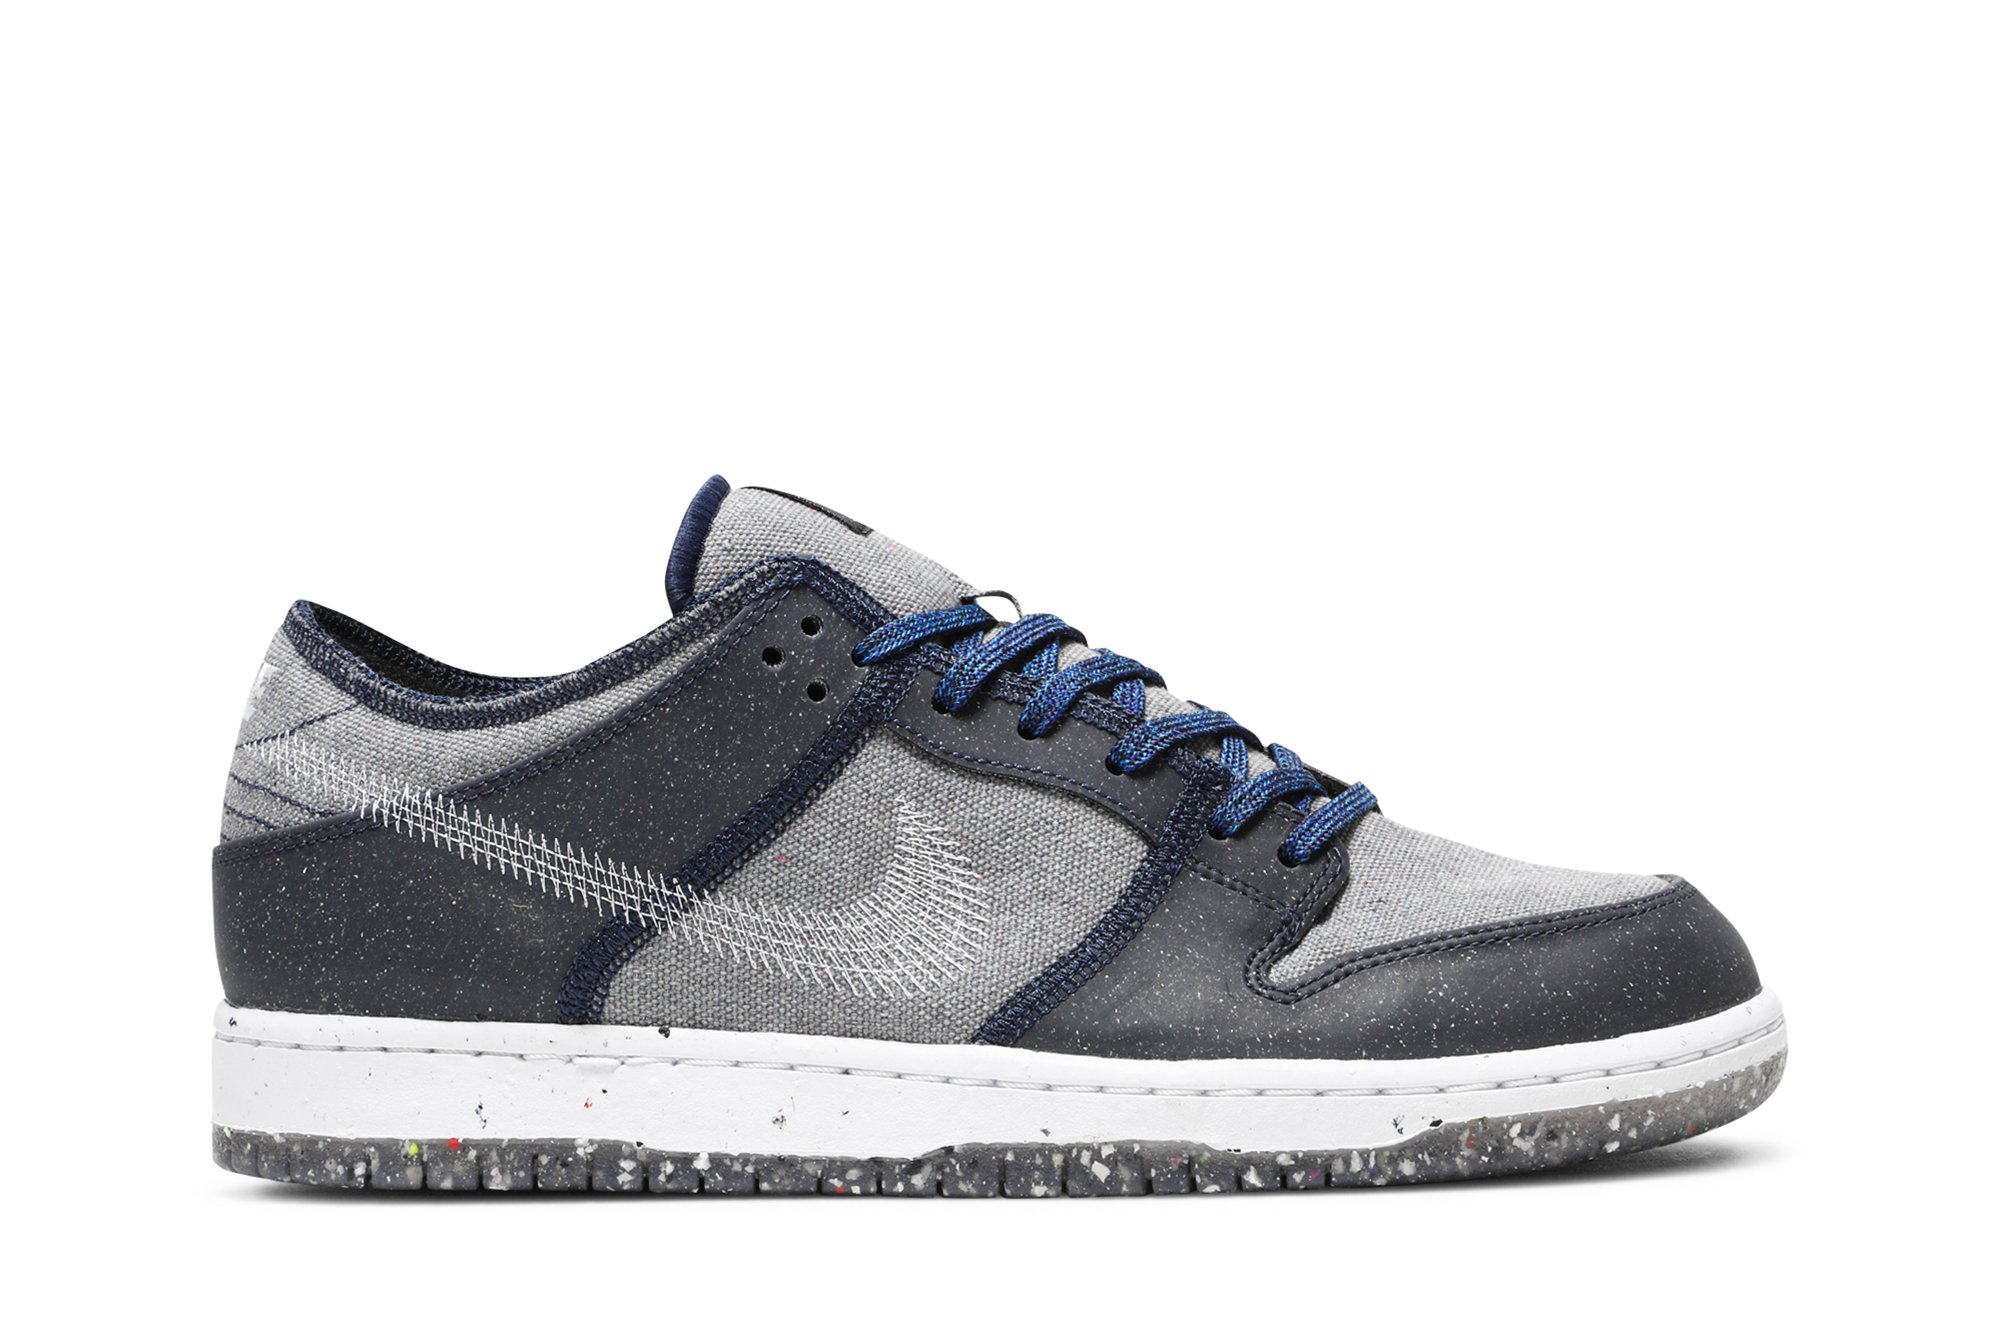 Buy Dunk Low Pro SB 'Crater' - CT2224 001 | GOAT